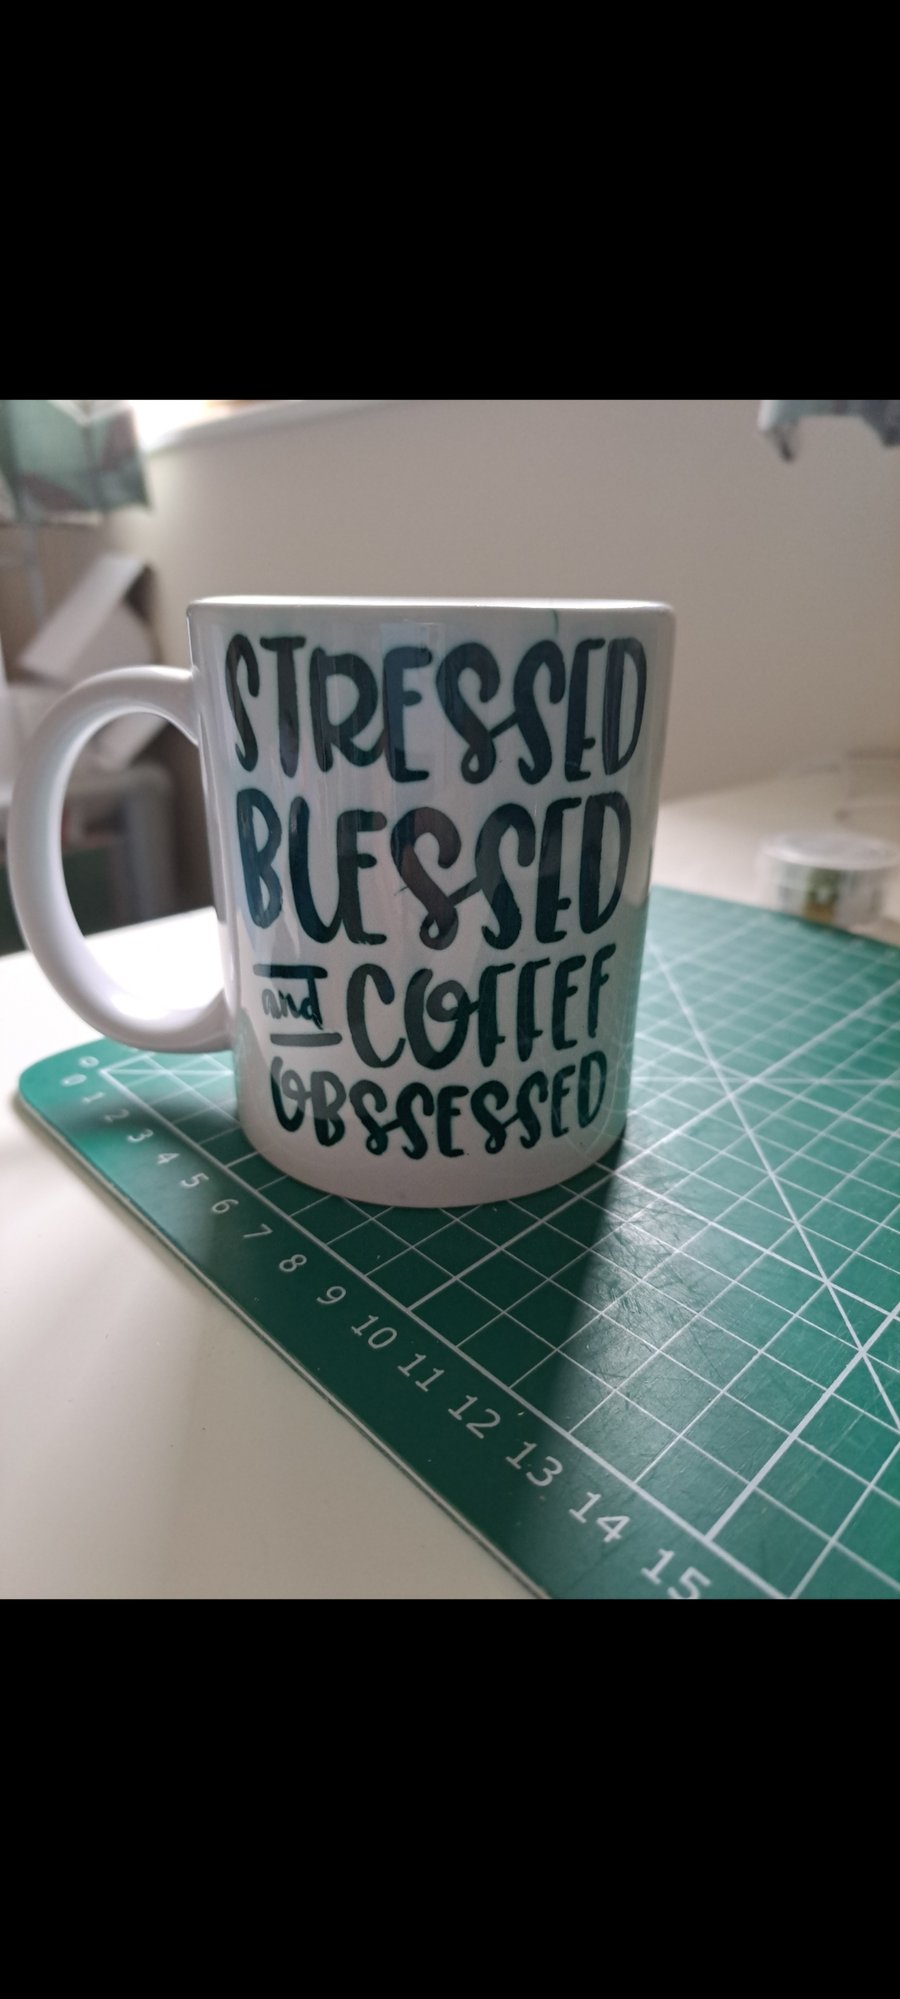 Stressed and blessed mug